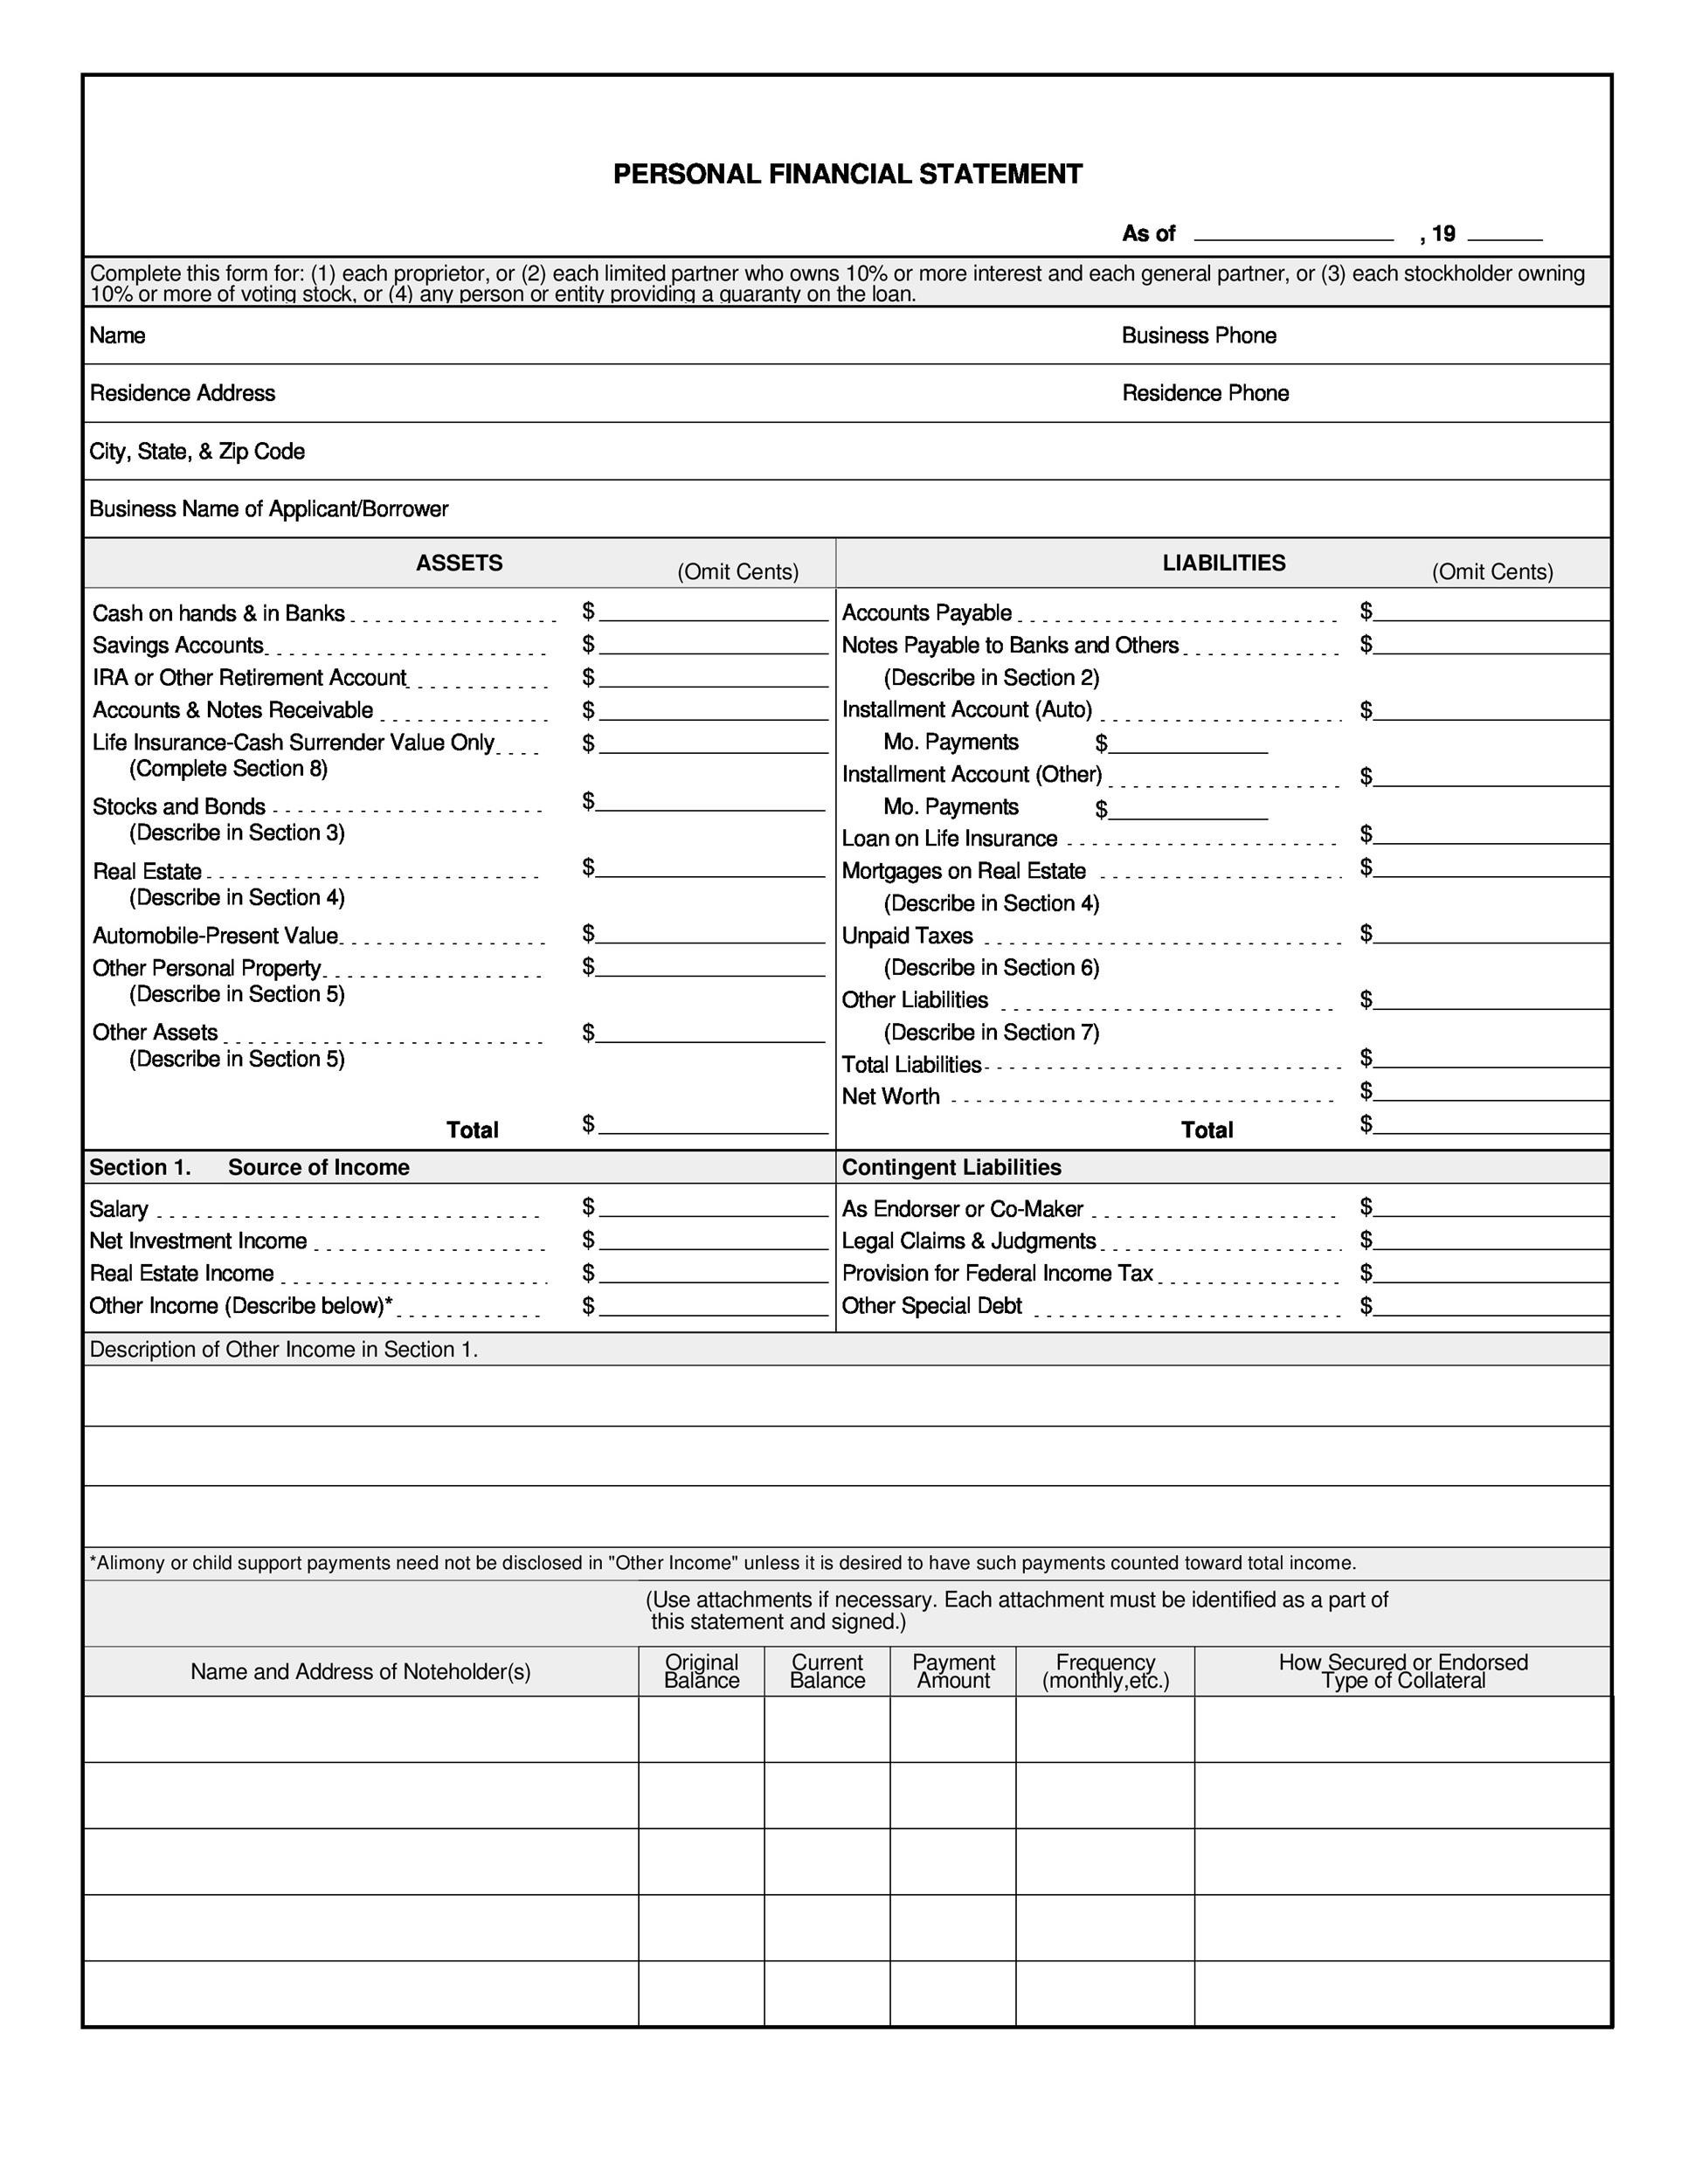 Free Excel Personal Financial Statement Templates Studyclix web fc2